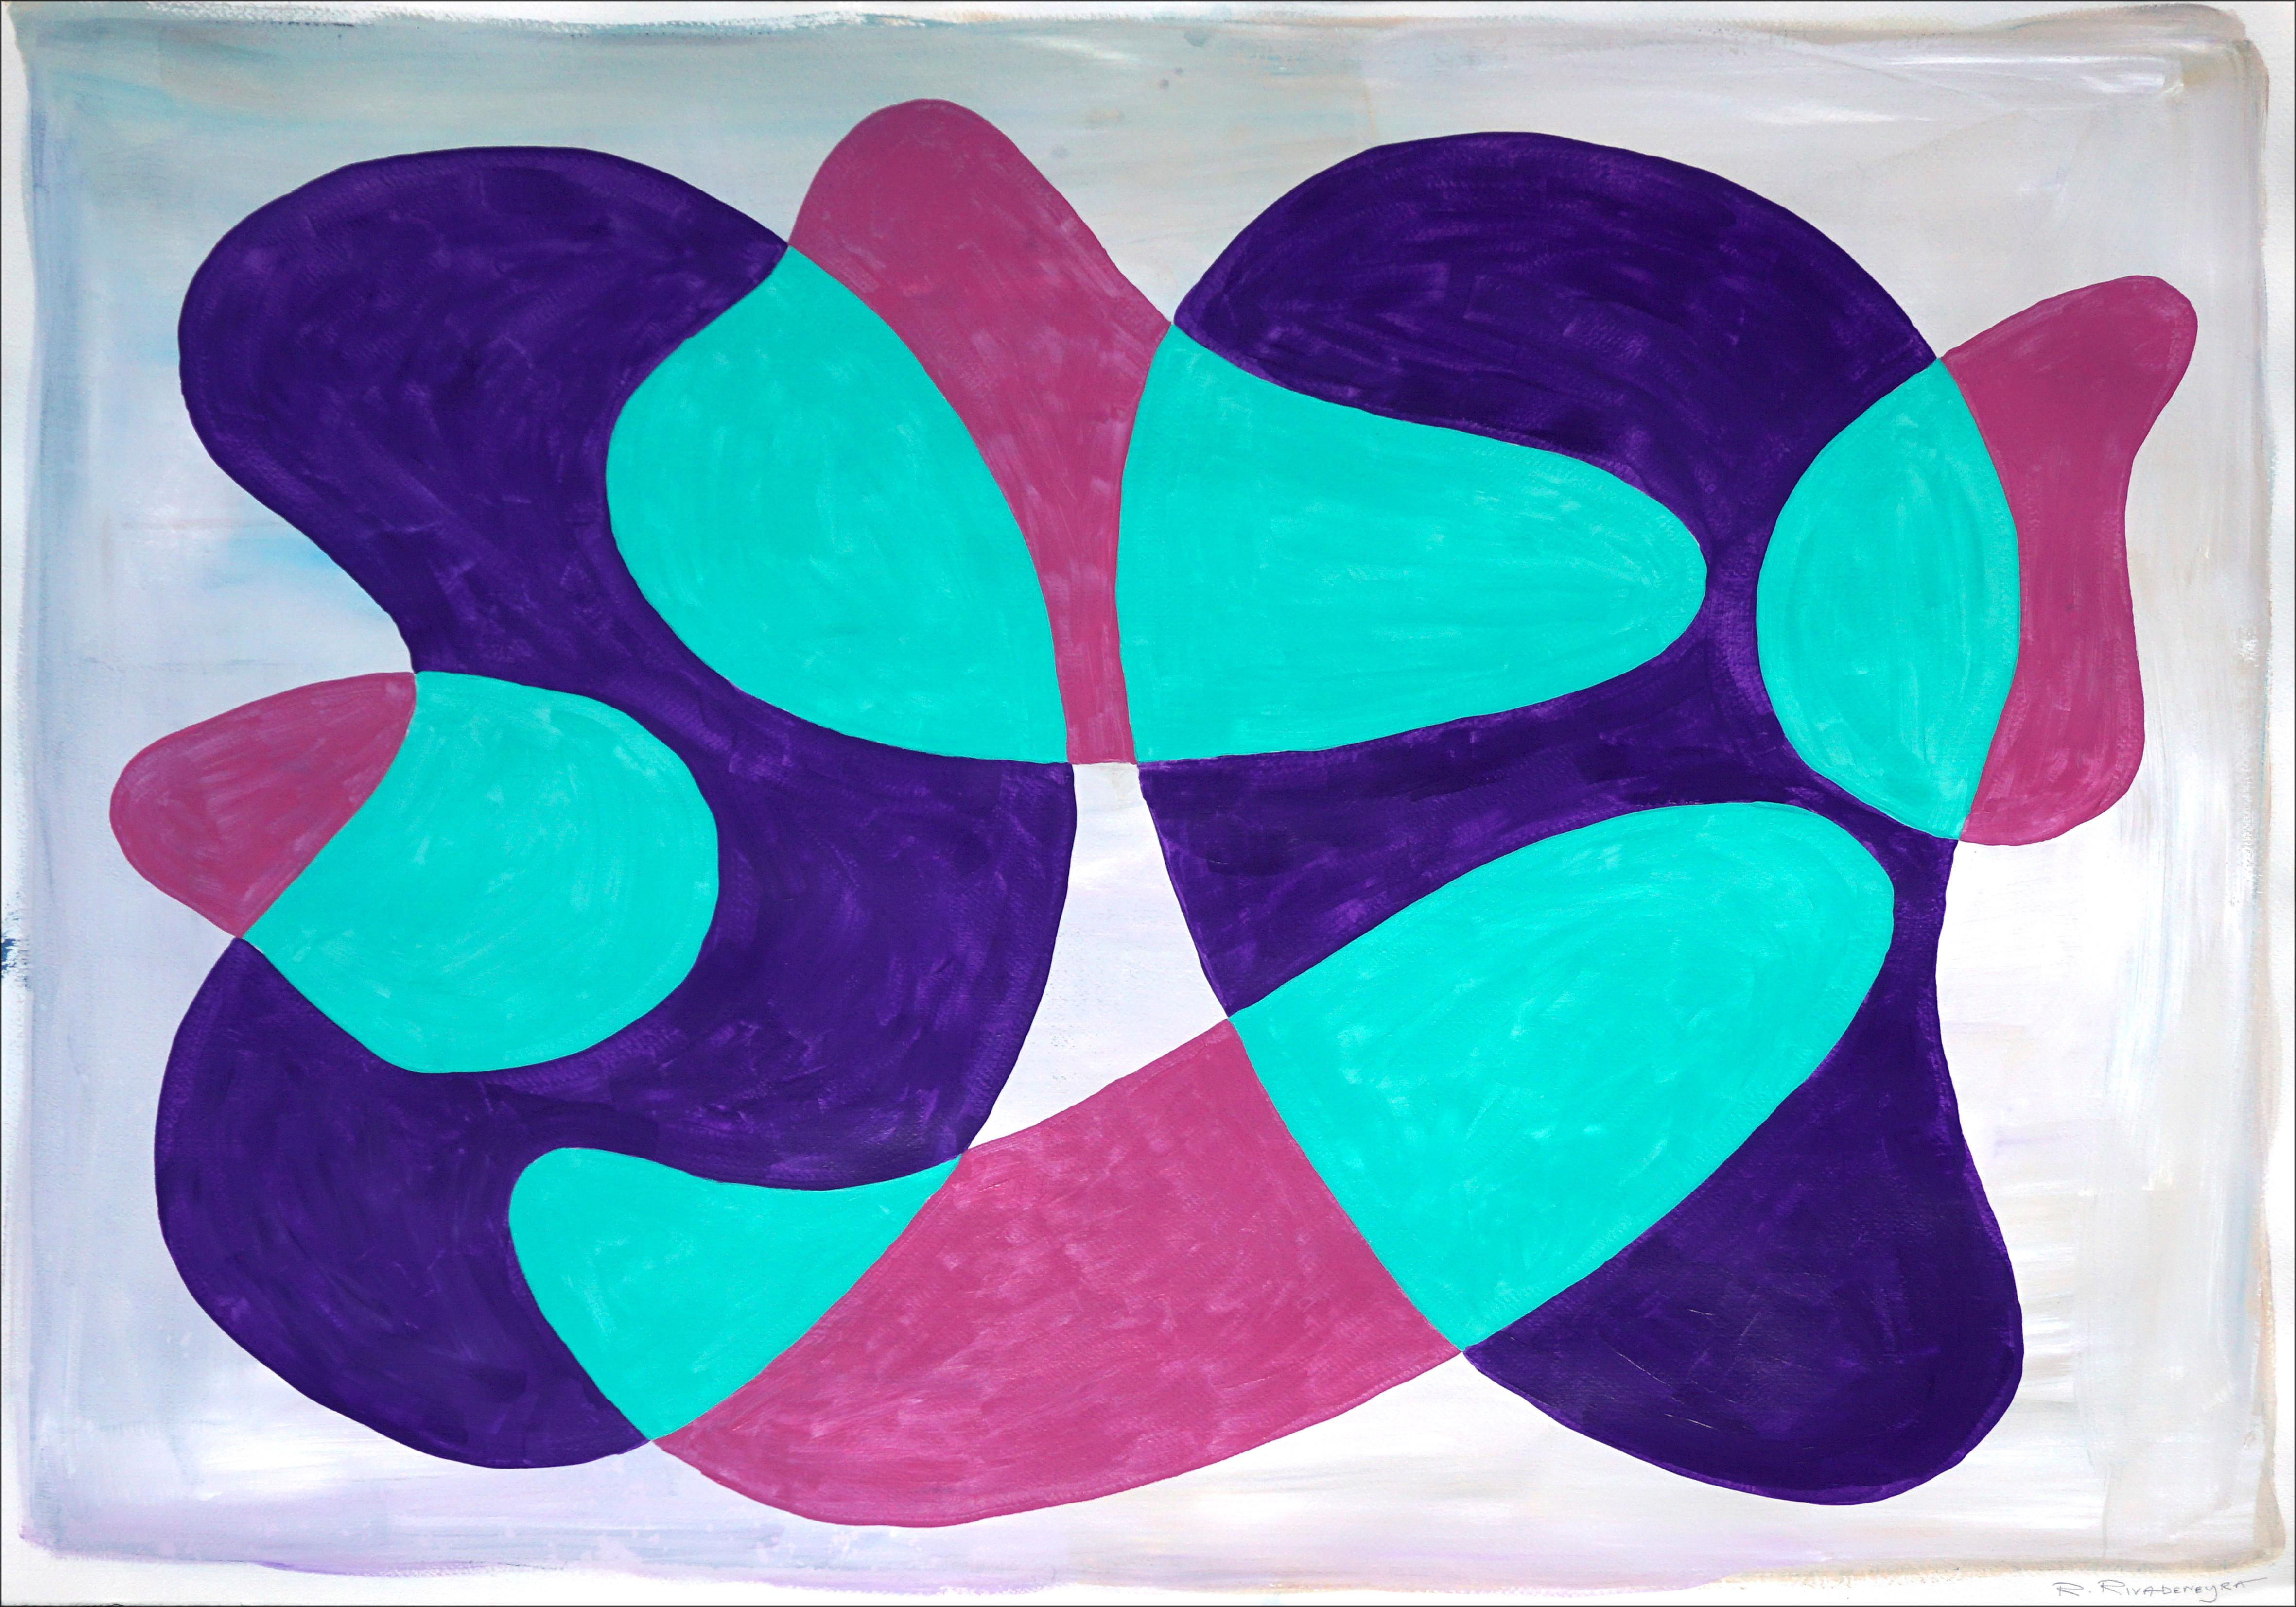 Ryan Rivadeneyra Abstract Painting - Translucent Teal Kidney Pools, Mid-Century Shapes and Layers in Cold Blue Tones